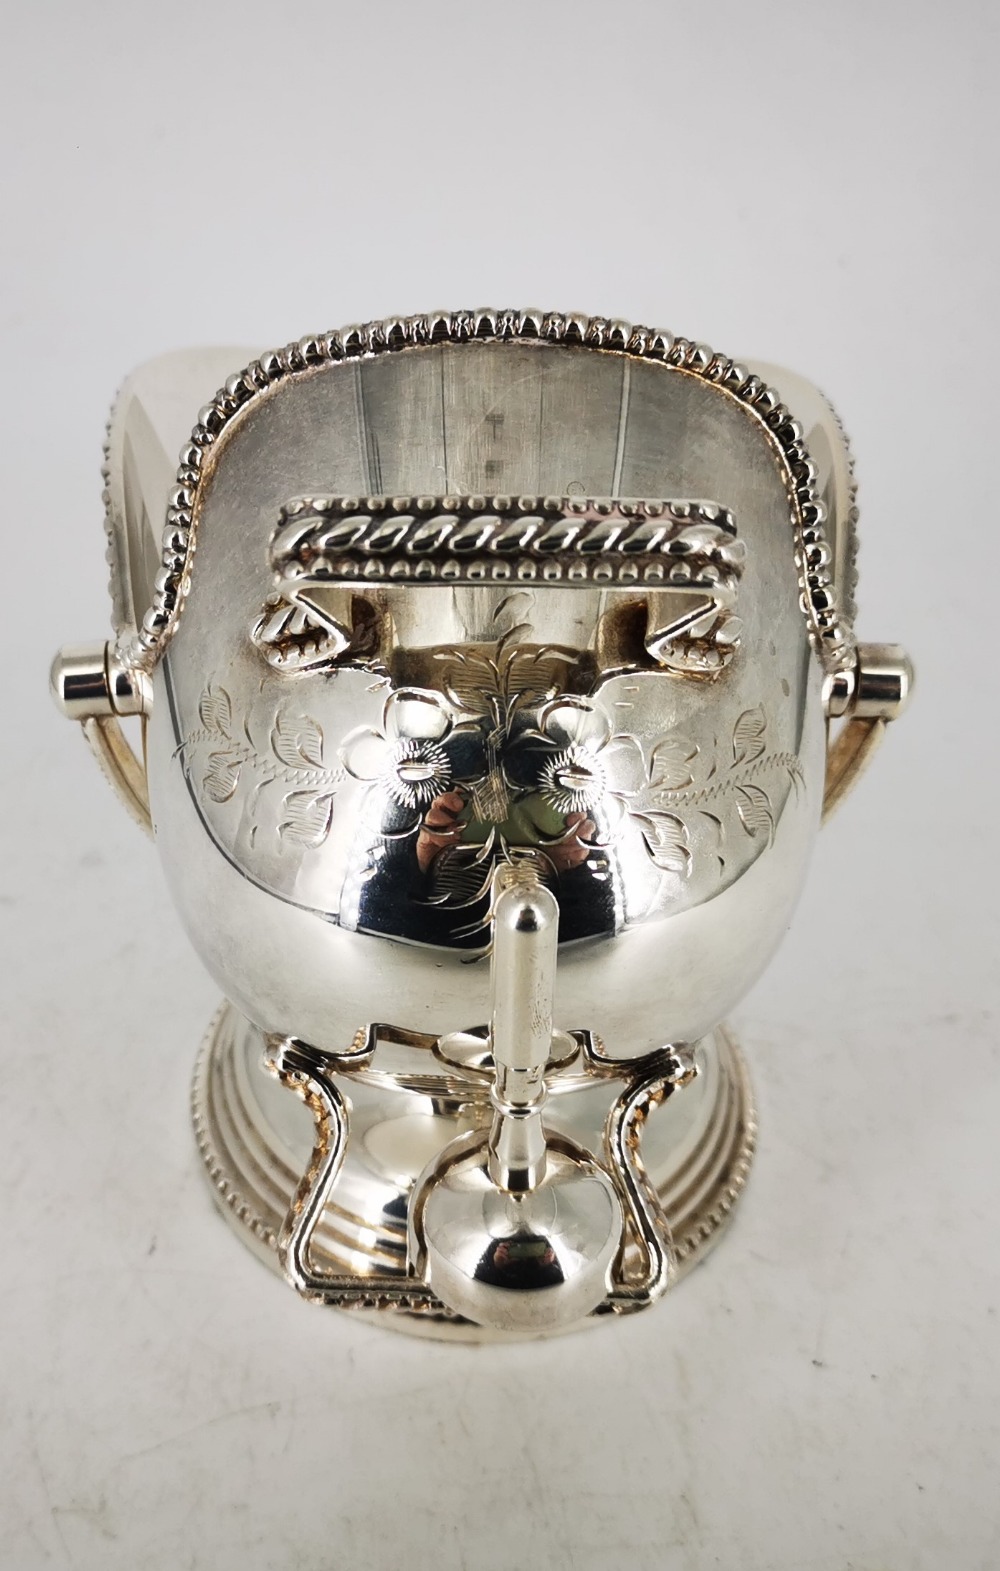 A GOOD QUALITY SILVER PLATED SUGAR BOWL, in the form of a helmet, with a shovel spoon, 14cm long